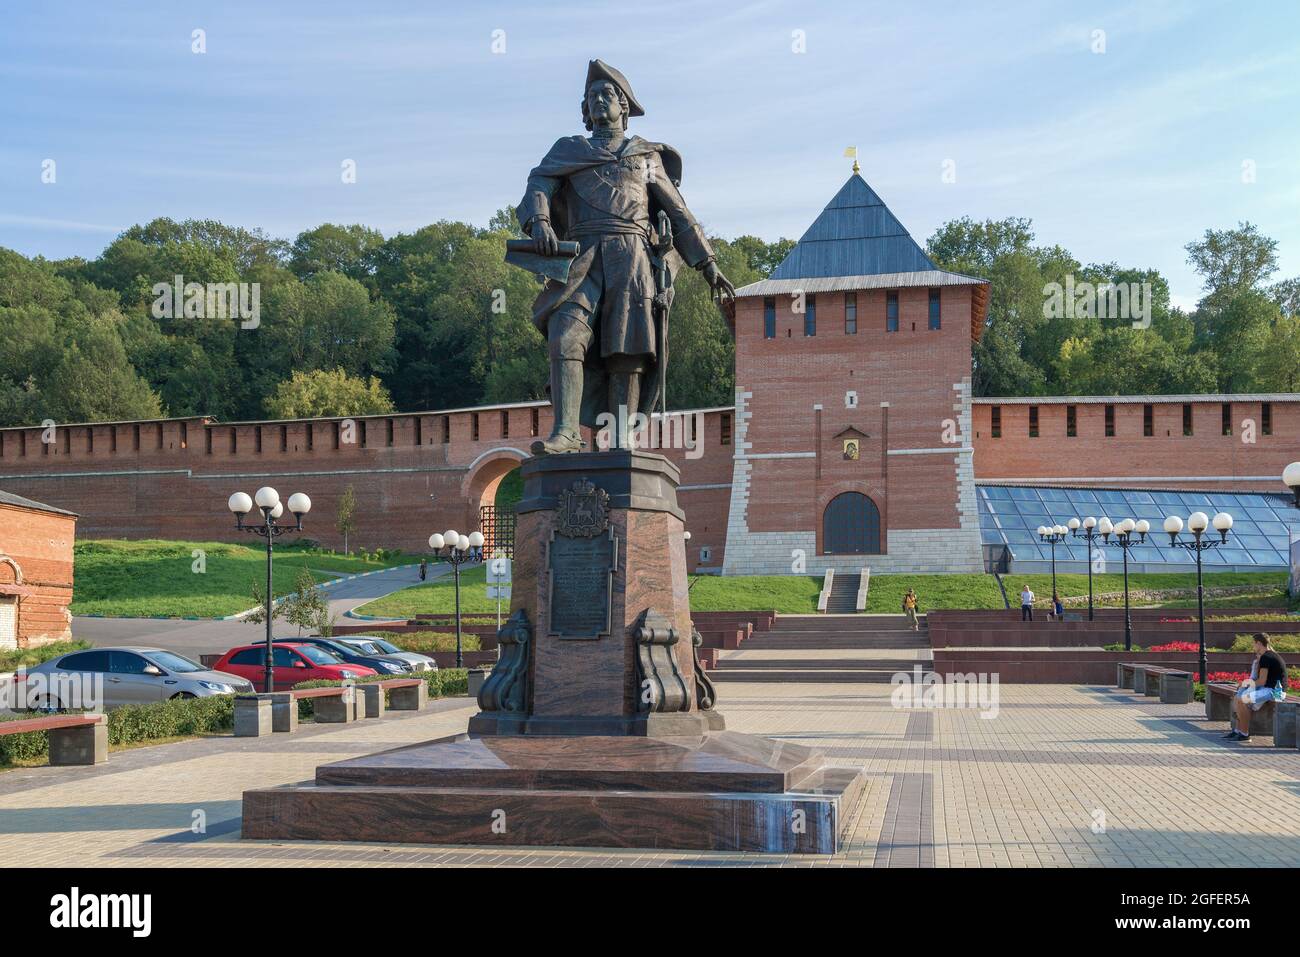 NIZHNY NOVGOROD, RUSSIA - AUGUST 27, 2015: Monument to the Russian Emperor Peter the Great against the background of the Nizhny Novgorod Kremlin on an Stock Photo